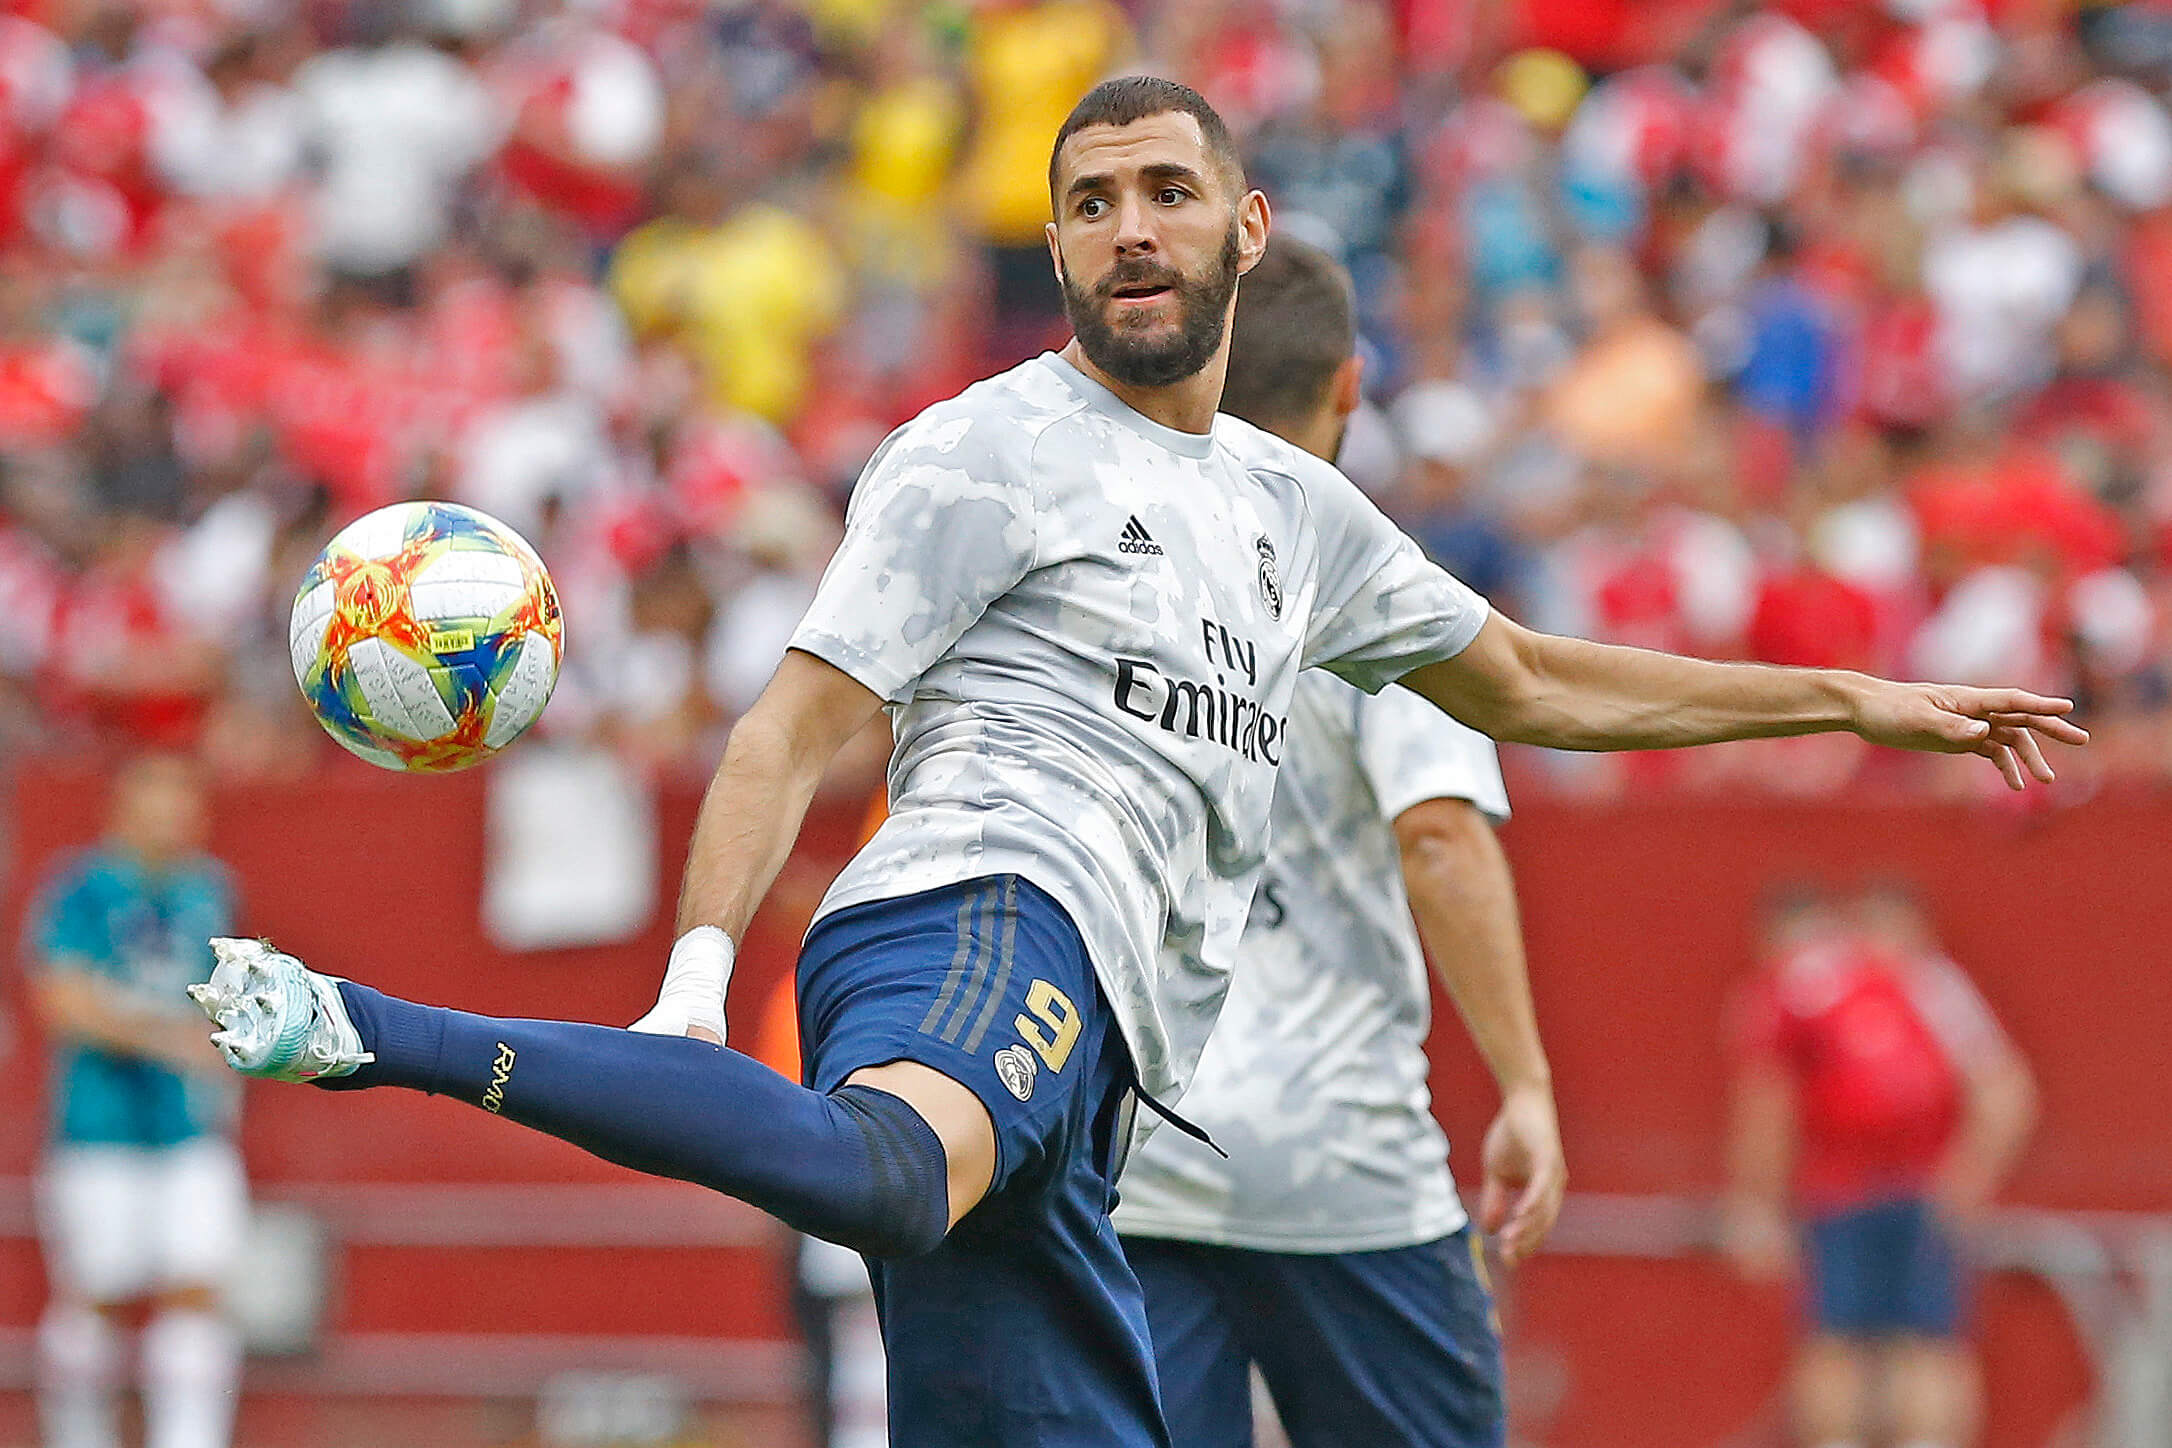 Liverpool vs Real Madrid Champions League Final Prop Picks: Benzema Steals the Show in Saint-Denis